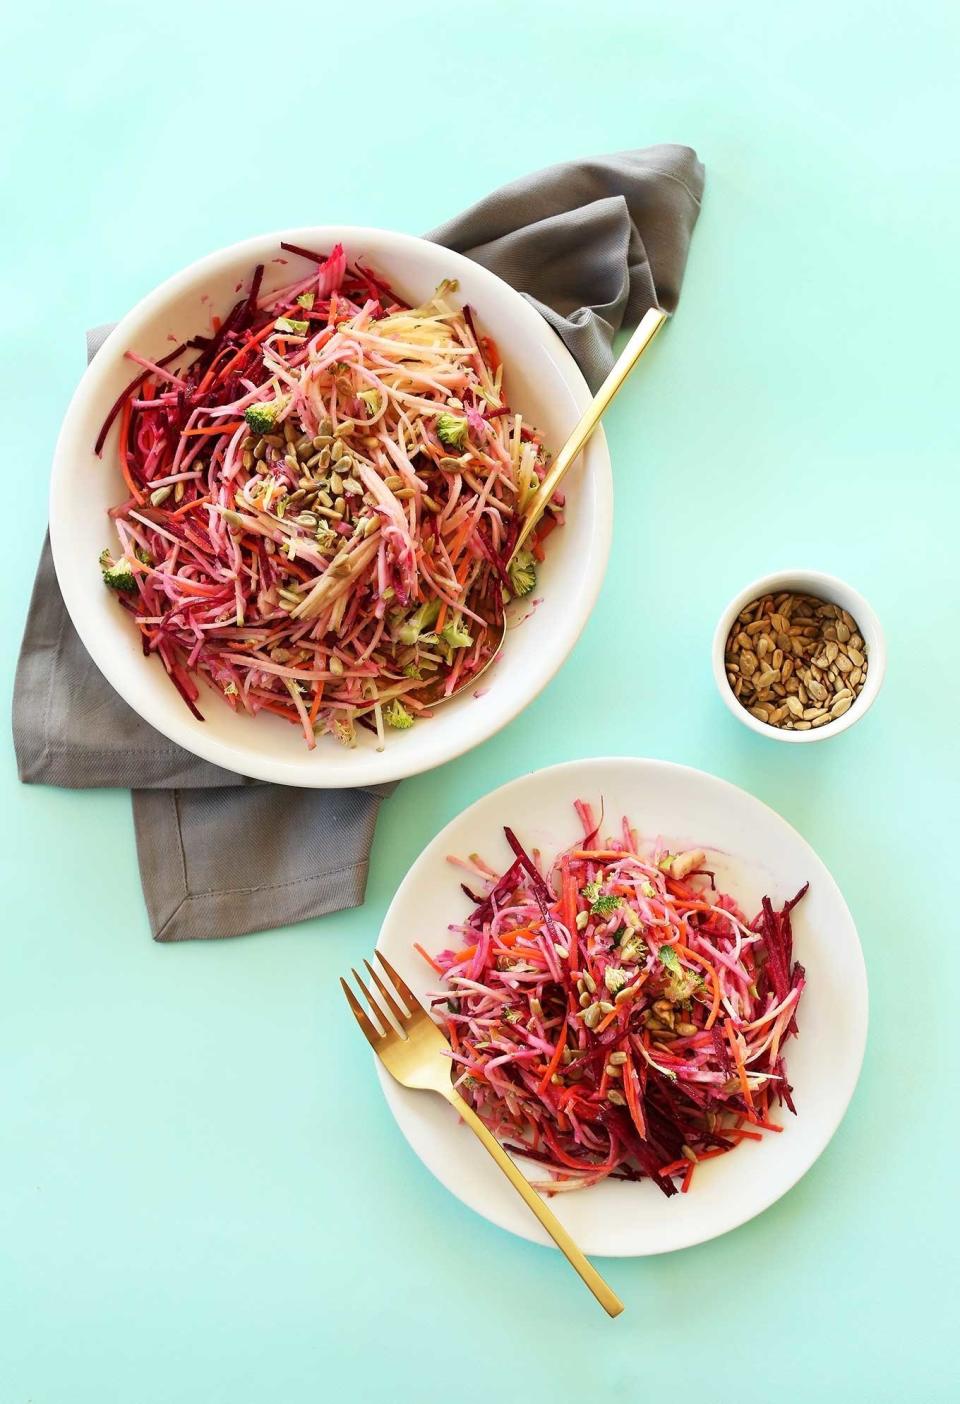 <strong>Get the <a href="http://minimalistbaker.com/simple-fall-slaw/" target="_blank">Simple Fall Slaw recipe</a> from Minimalist Baker</strong>